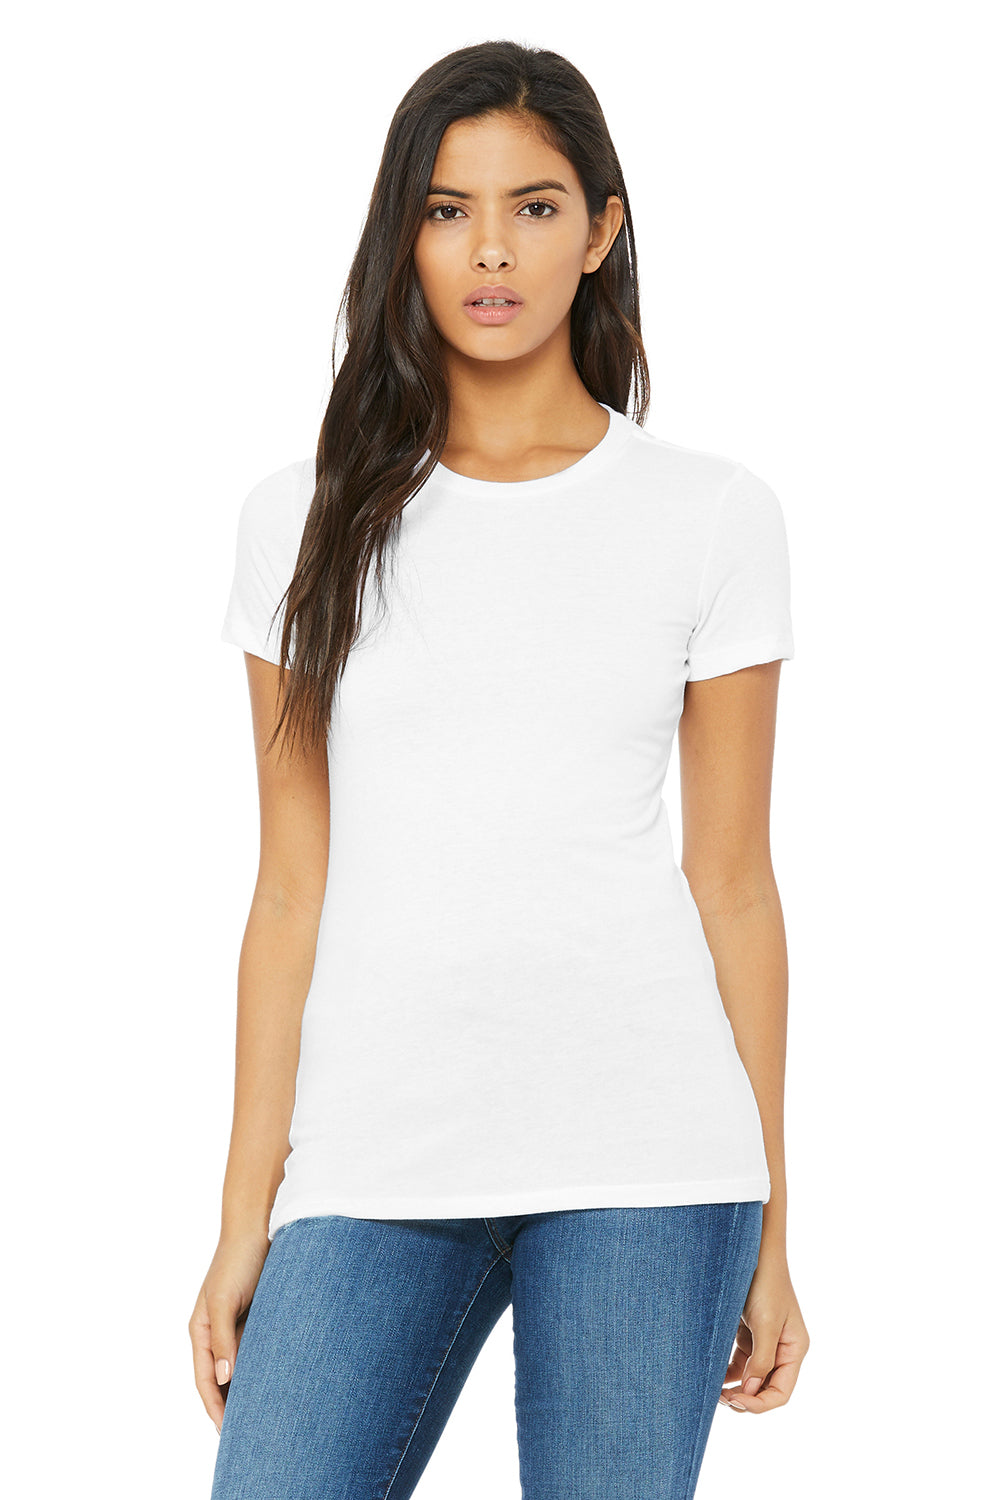 Bella + Canvas BC6004/6004 Womens The Favorite Short Sleeve Crewneck T-Shirt Solid White Model Front